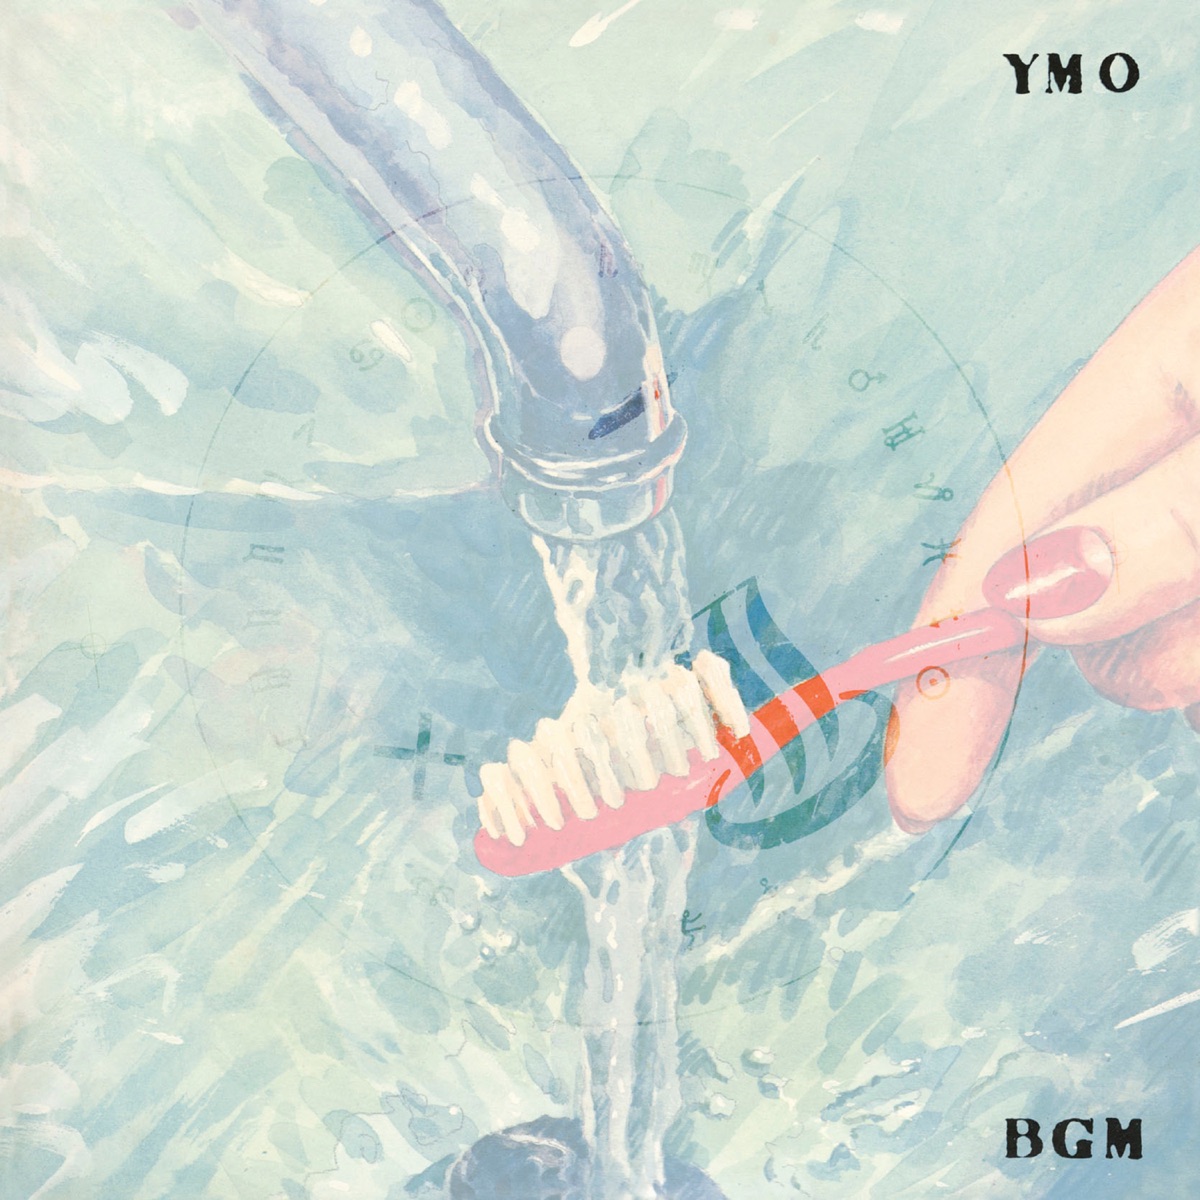 BGM by Yellow Magic Orchestra on Apple Music